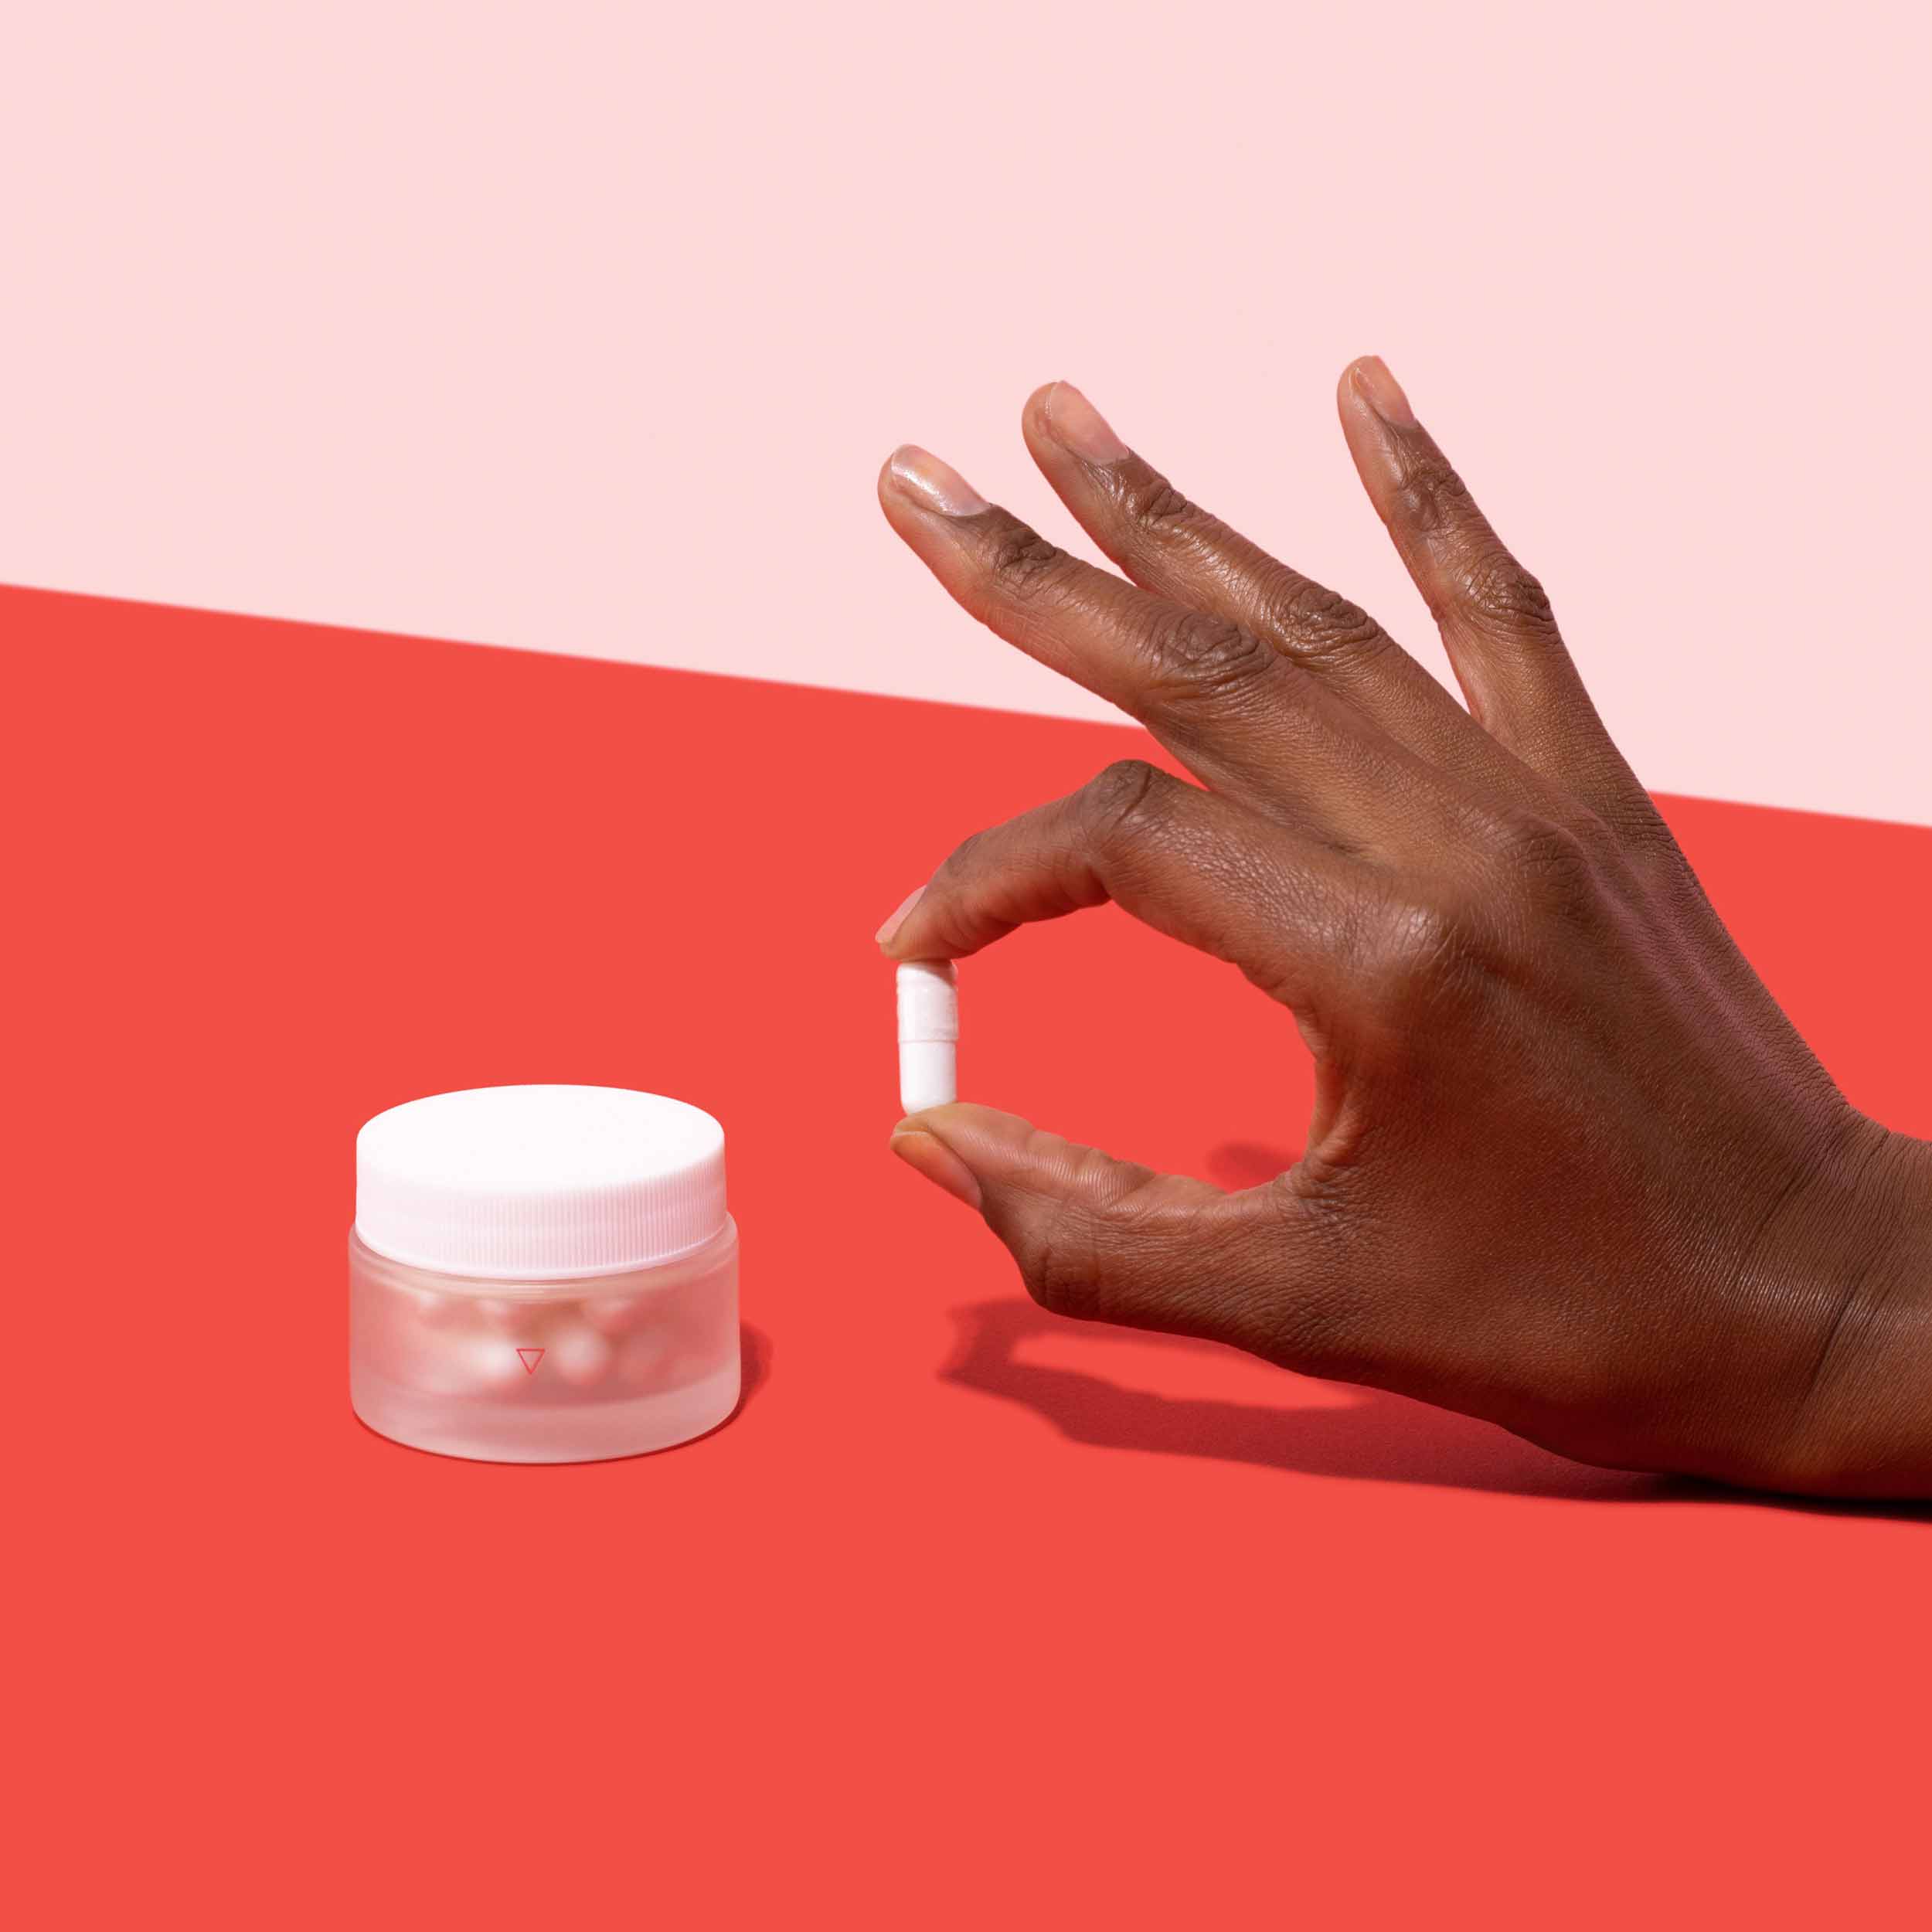 Jar of boric acid suppositories and hand holding suppository on red surface, on pink background